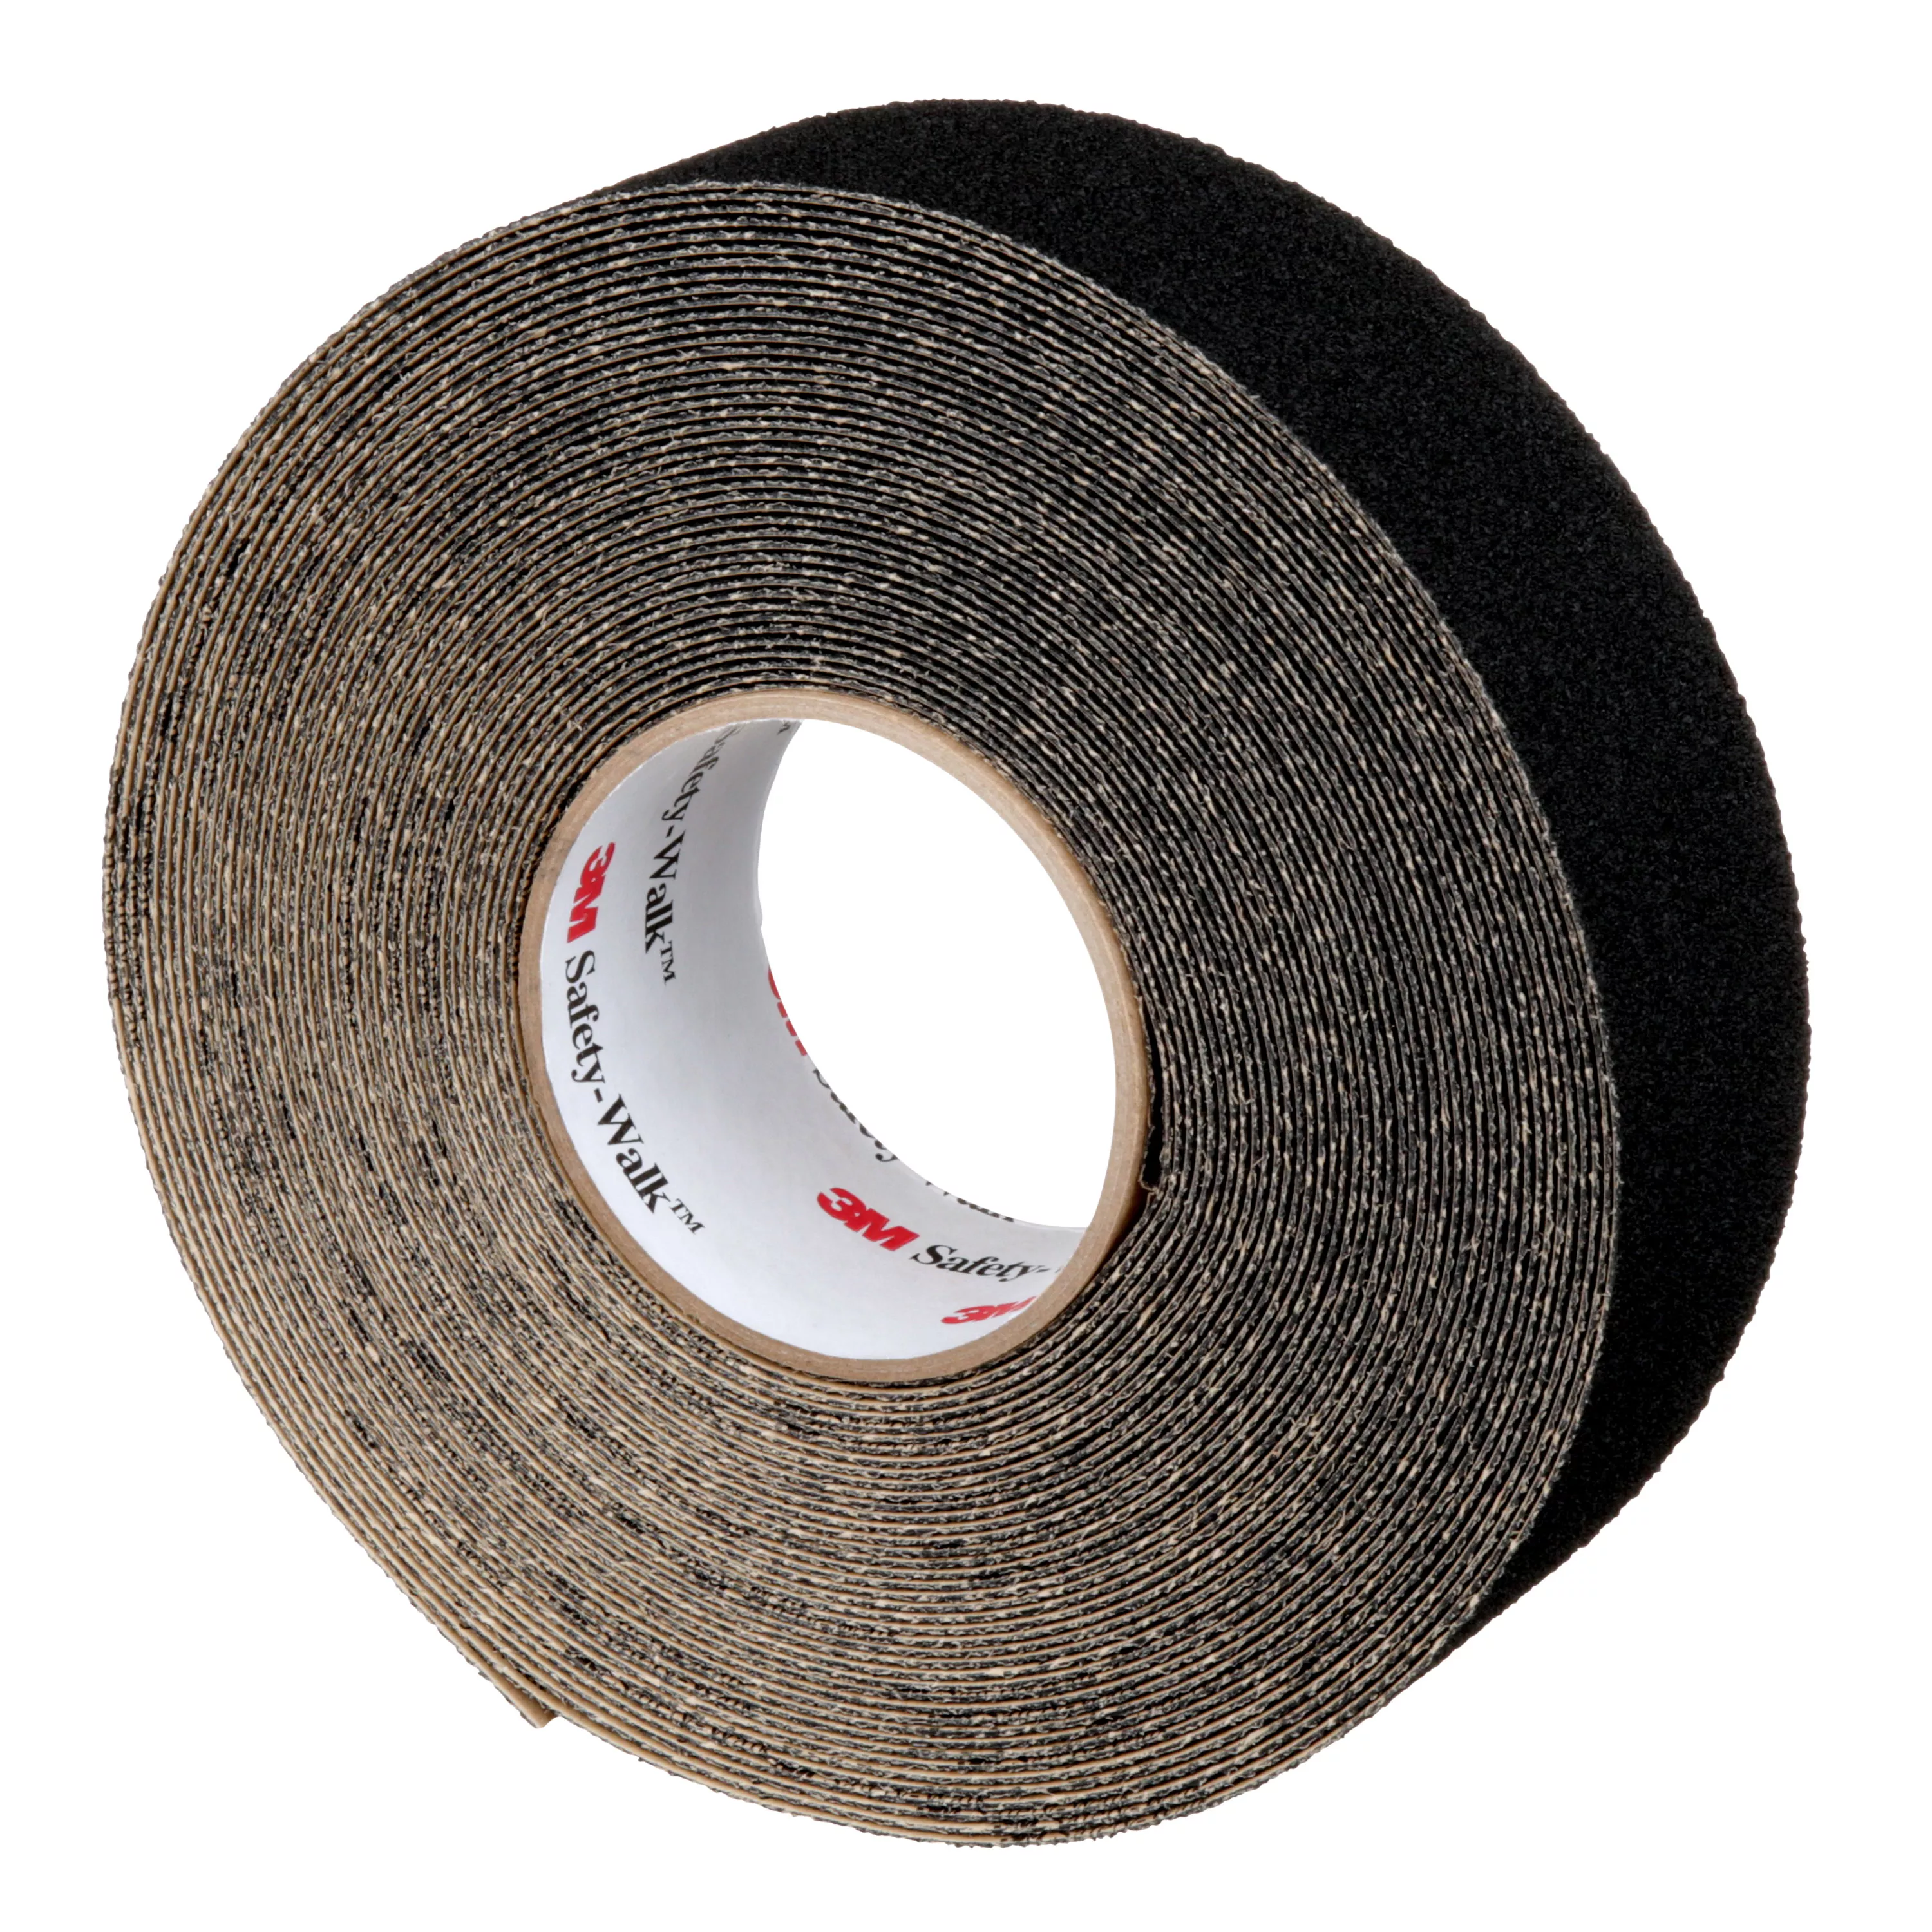 Product Number 310 | 3M™ Safety-Walk™ Slip-Resistant Medium Resilient Tapes & Treads 310